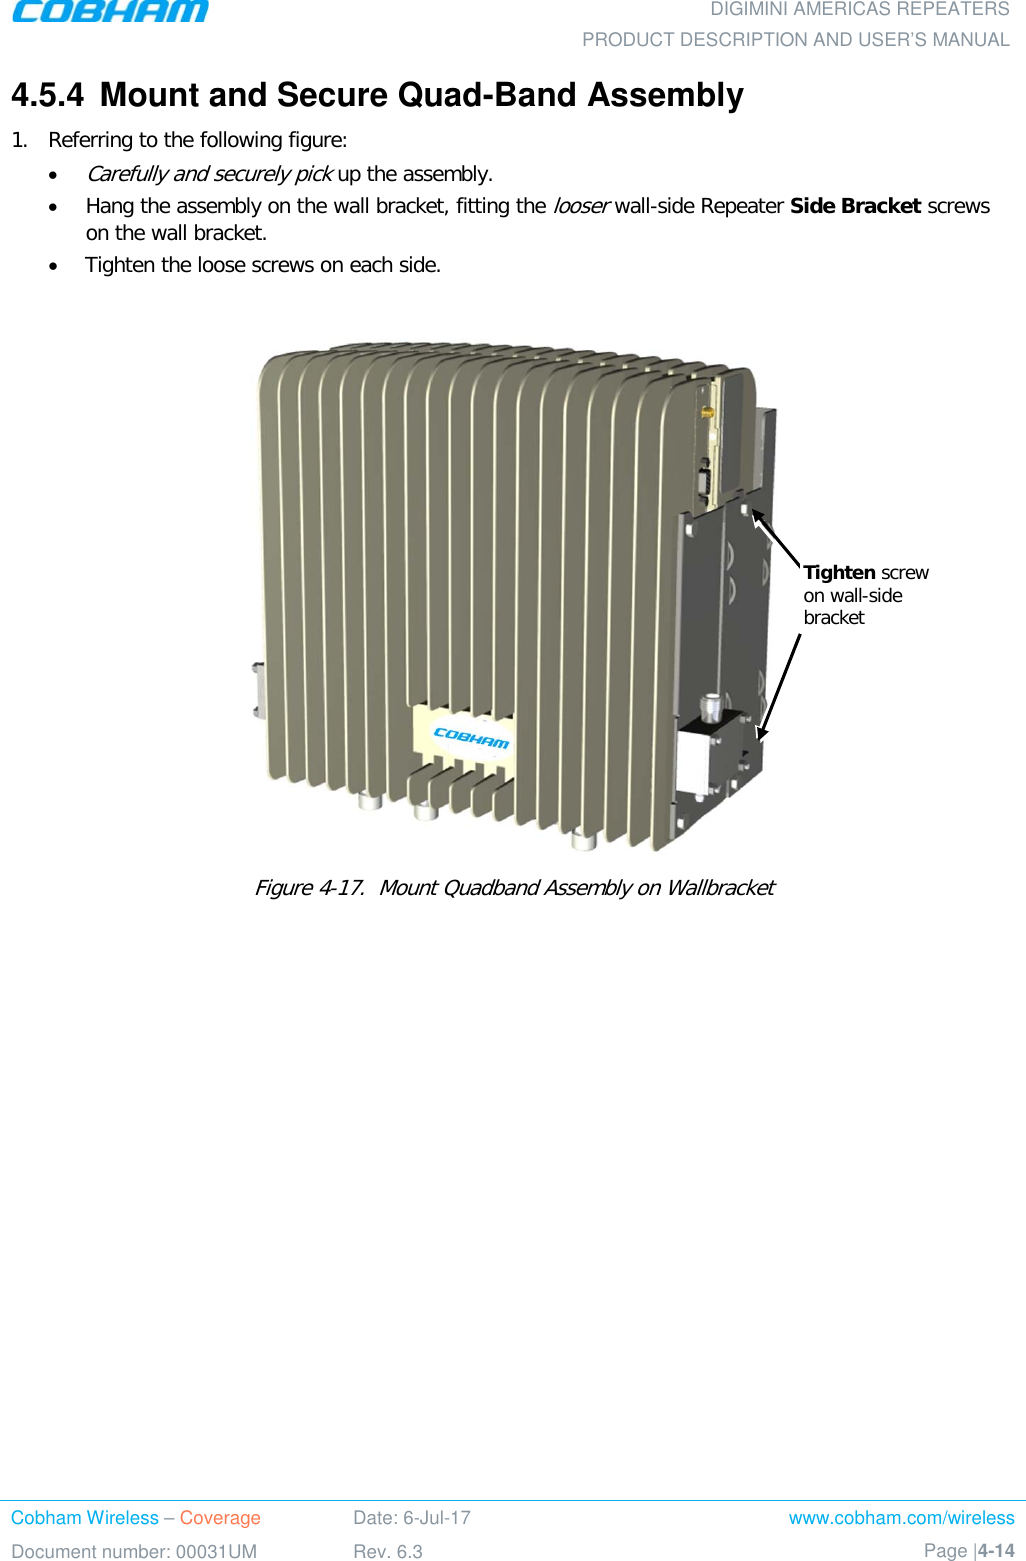  DIGIMINI AMERICAS REPEATERS PRODUCT DESCRIPTION AND USER’S MANUAL Cobham Wireless – Coverage Date: 6-Jul-17 www.cobham.com/wireless Document number: 00031UM Rev. 6.3 Page |4-14  4.5.4  Mount and Secure Quad-Band Assembly 1.  Referring to the following figure: • Carefully and securely pick up the assembly. • Hang the assembly on the wall bracket, fitting the looser wall-side Repeater Side Bracket screws on the wall bracket. • Tighten the loose screws on each side.    Figure  4-17.  Mount Quadband Assembly on Wallbracket Tighten screw on wall-side bracket 